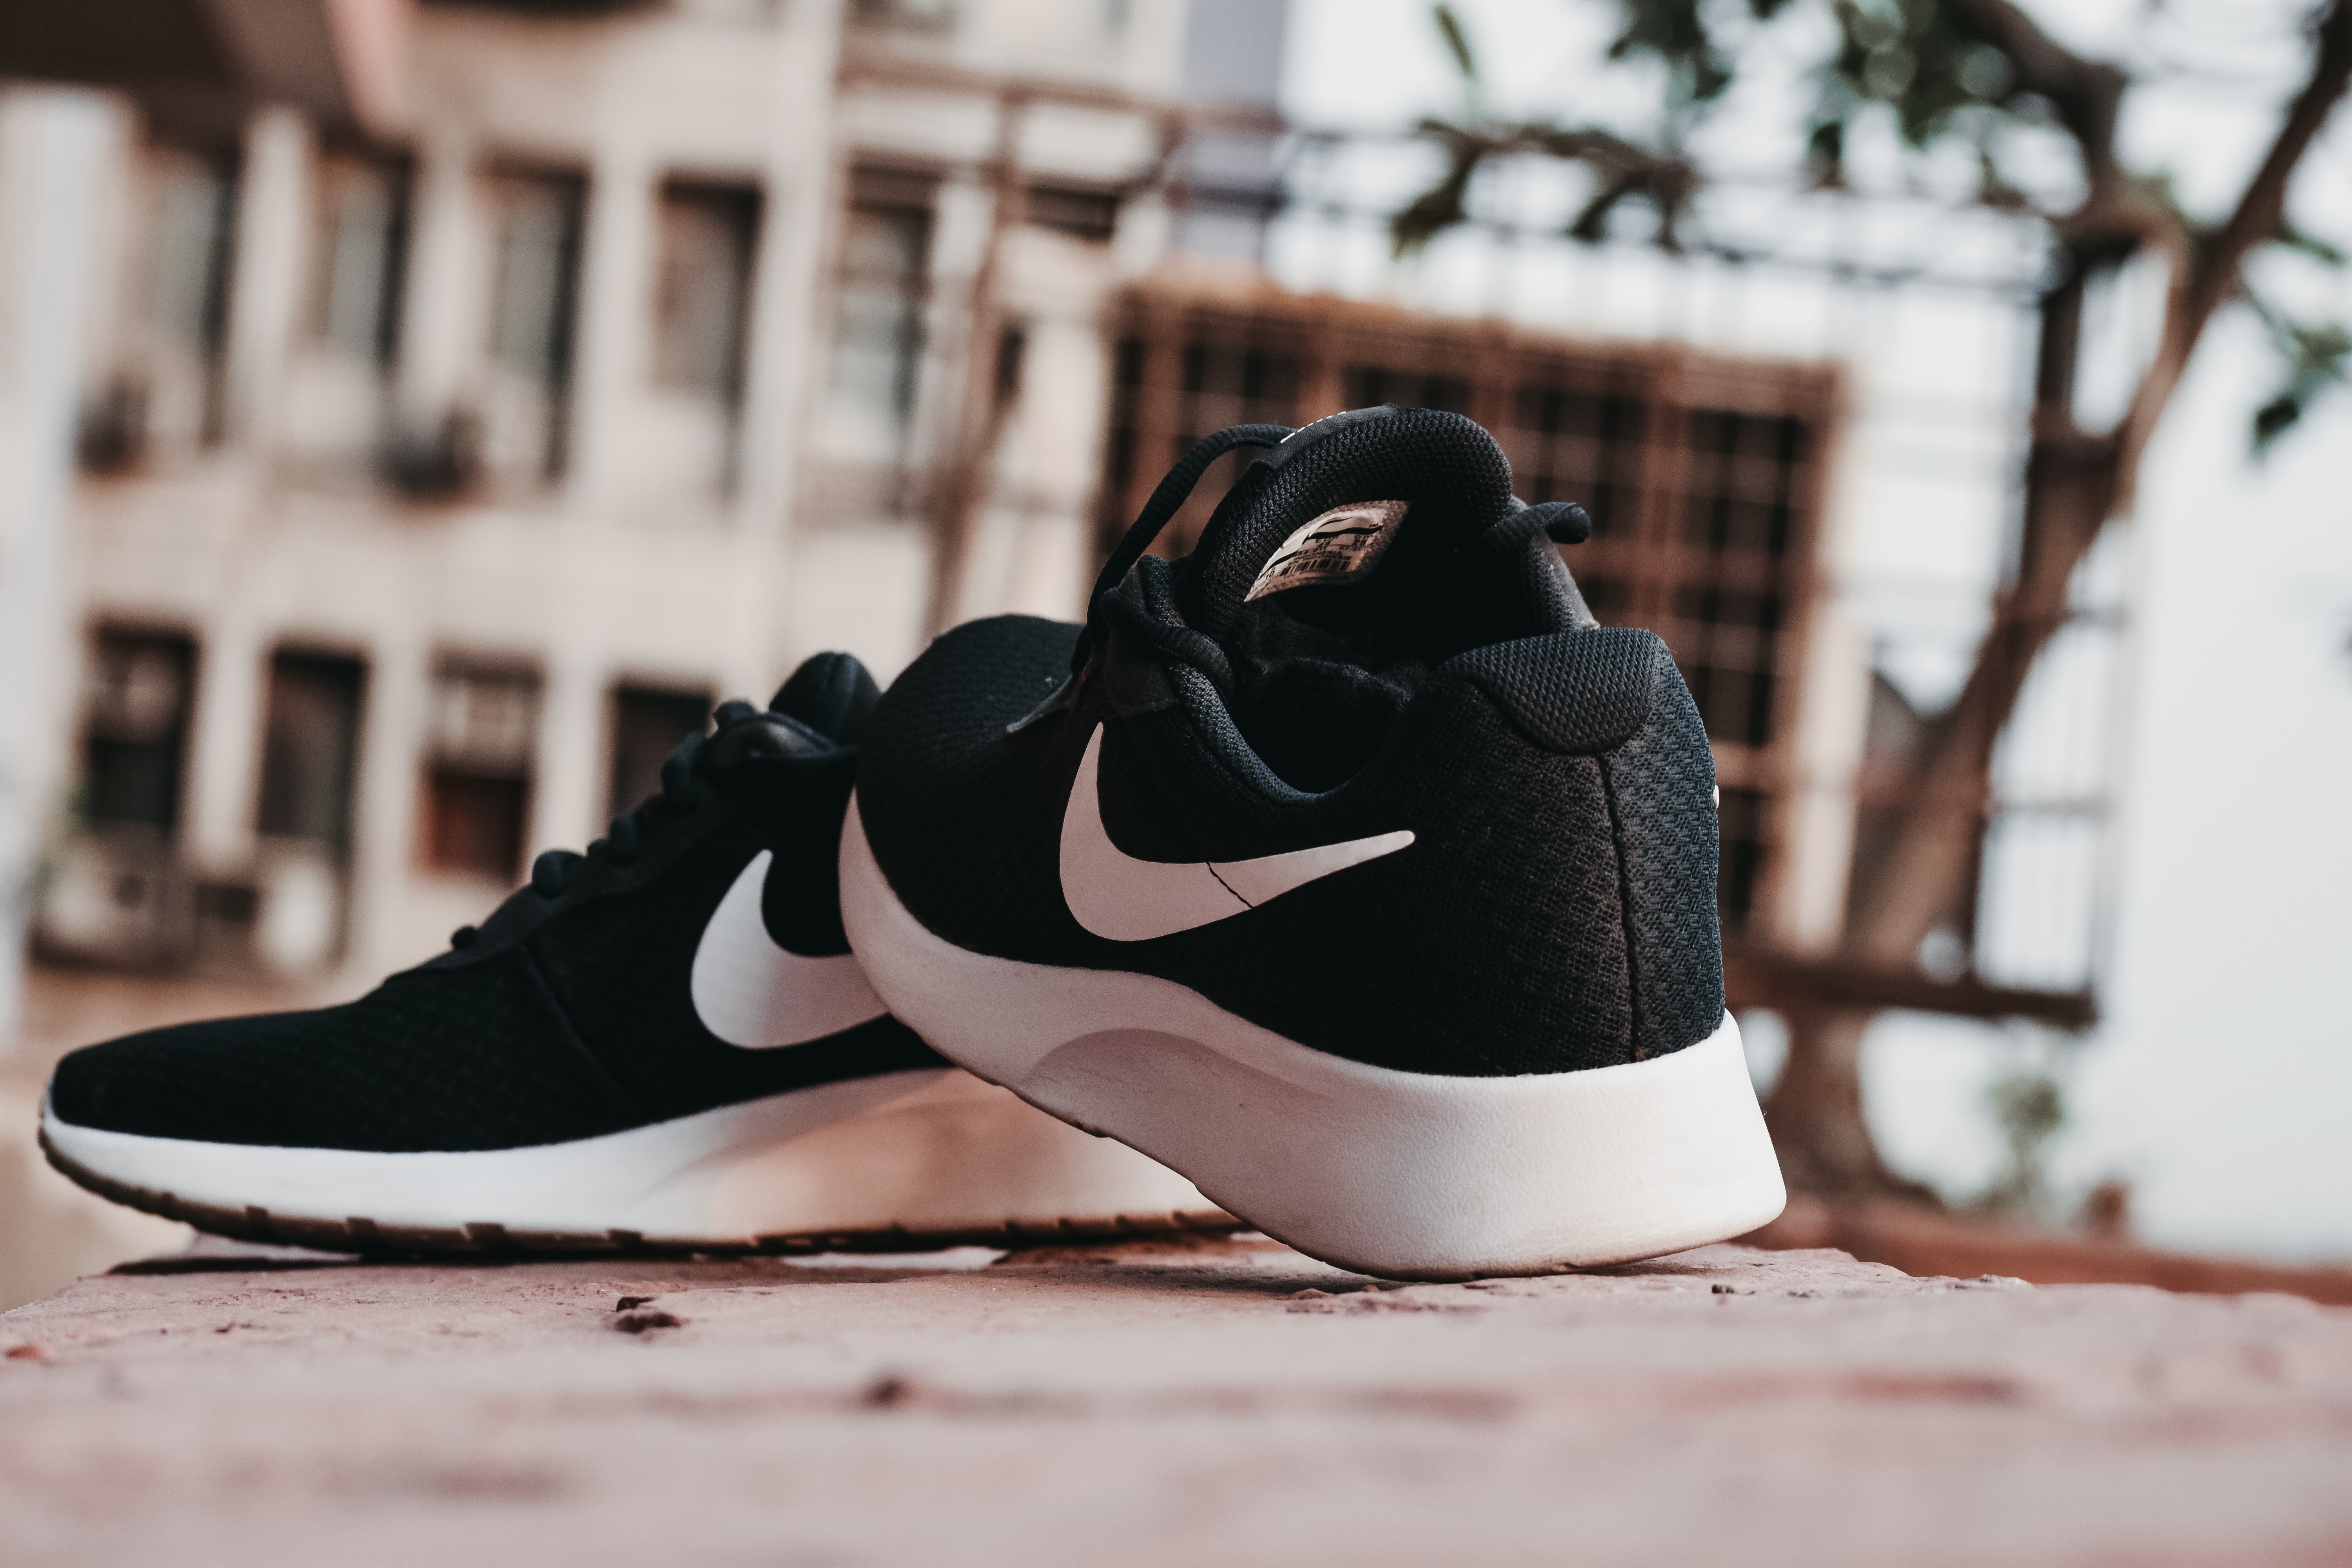 Pair of black and white Nike running shoes